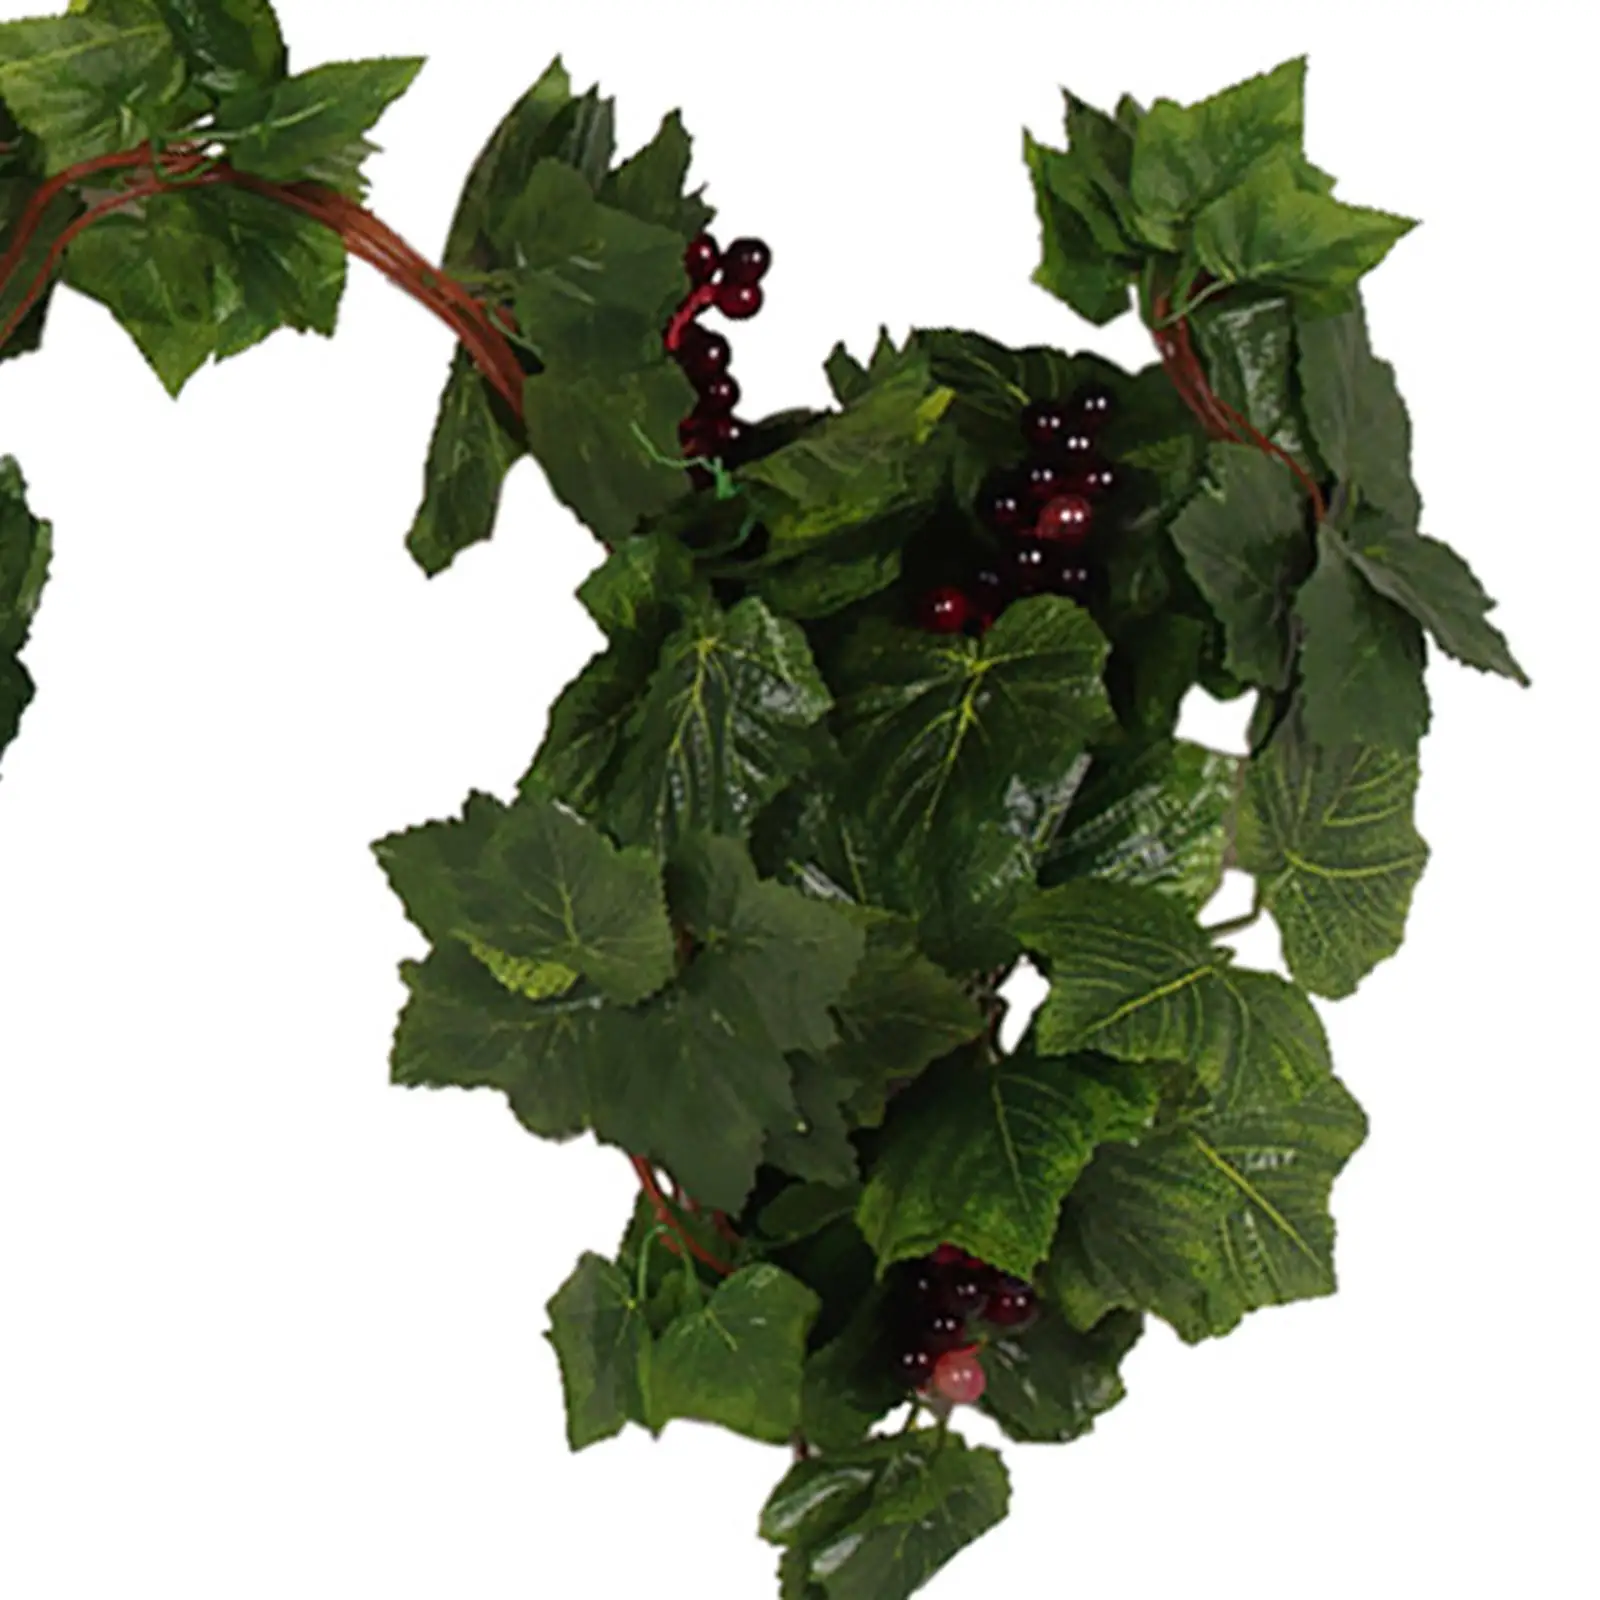 Artificial Plants Flowers Hanging Ivy Grape  Foliage With Grape